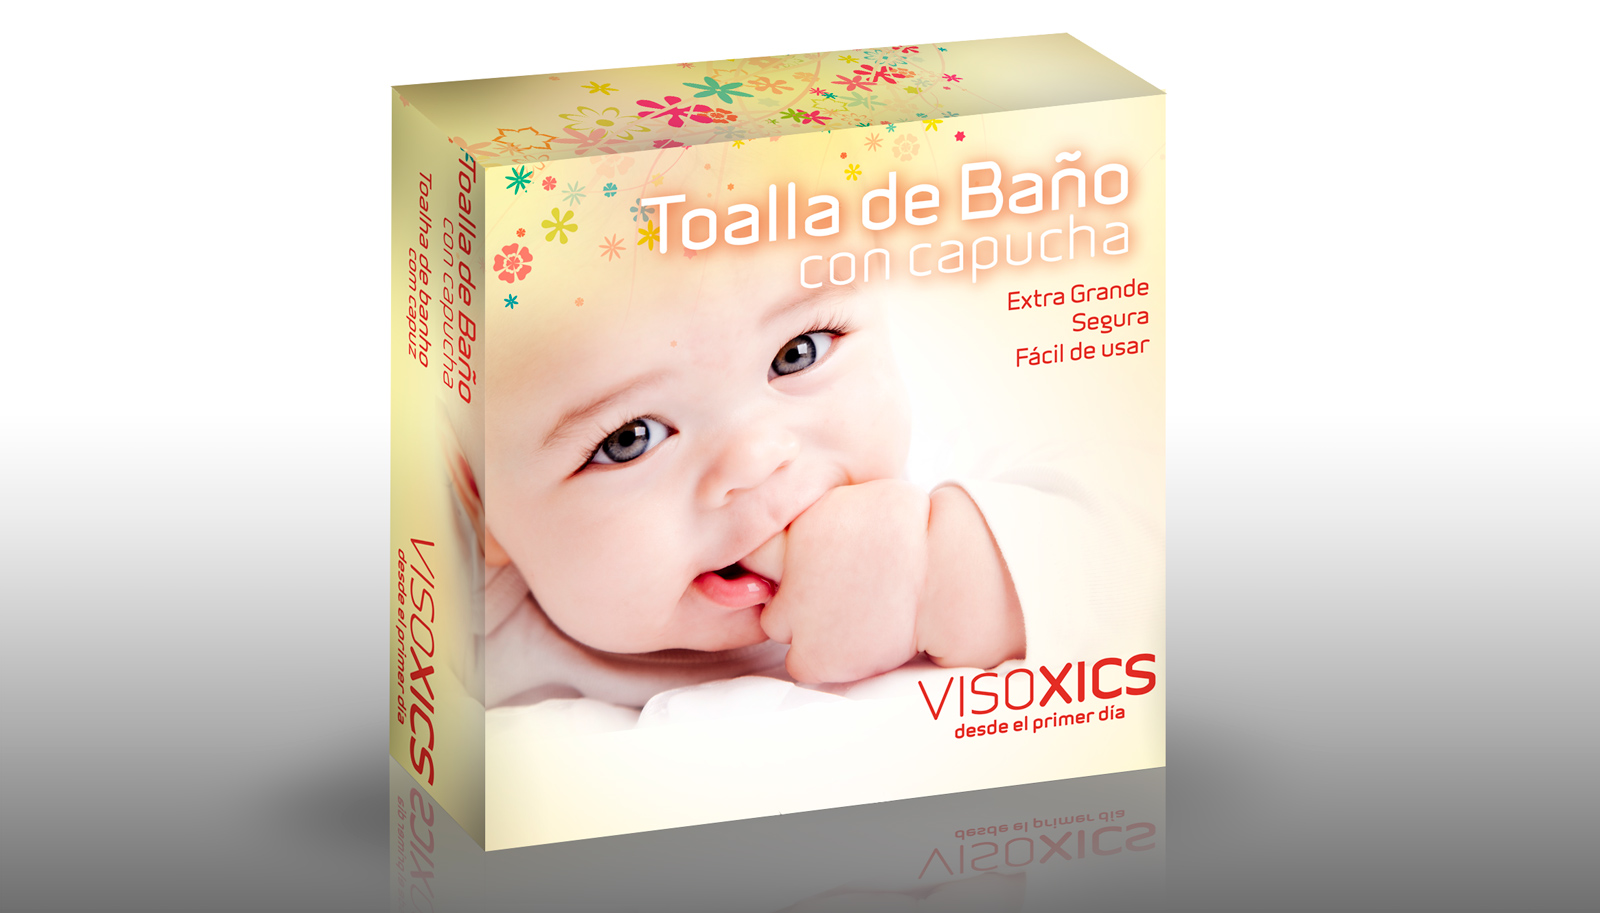 Portfolio of graphic and creative design of boxes and packaging for children's and child care products